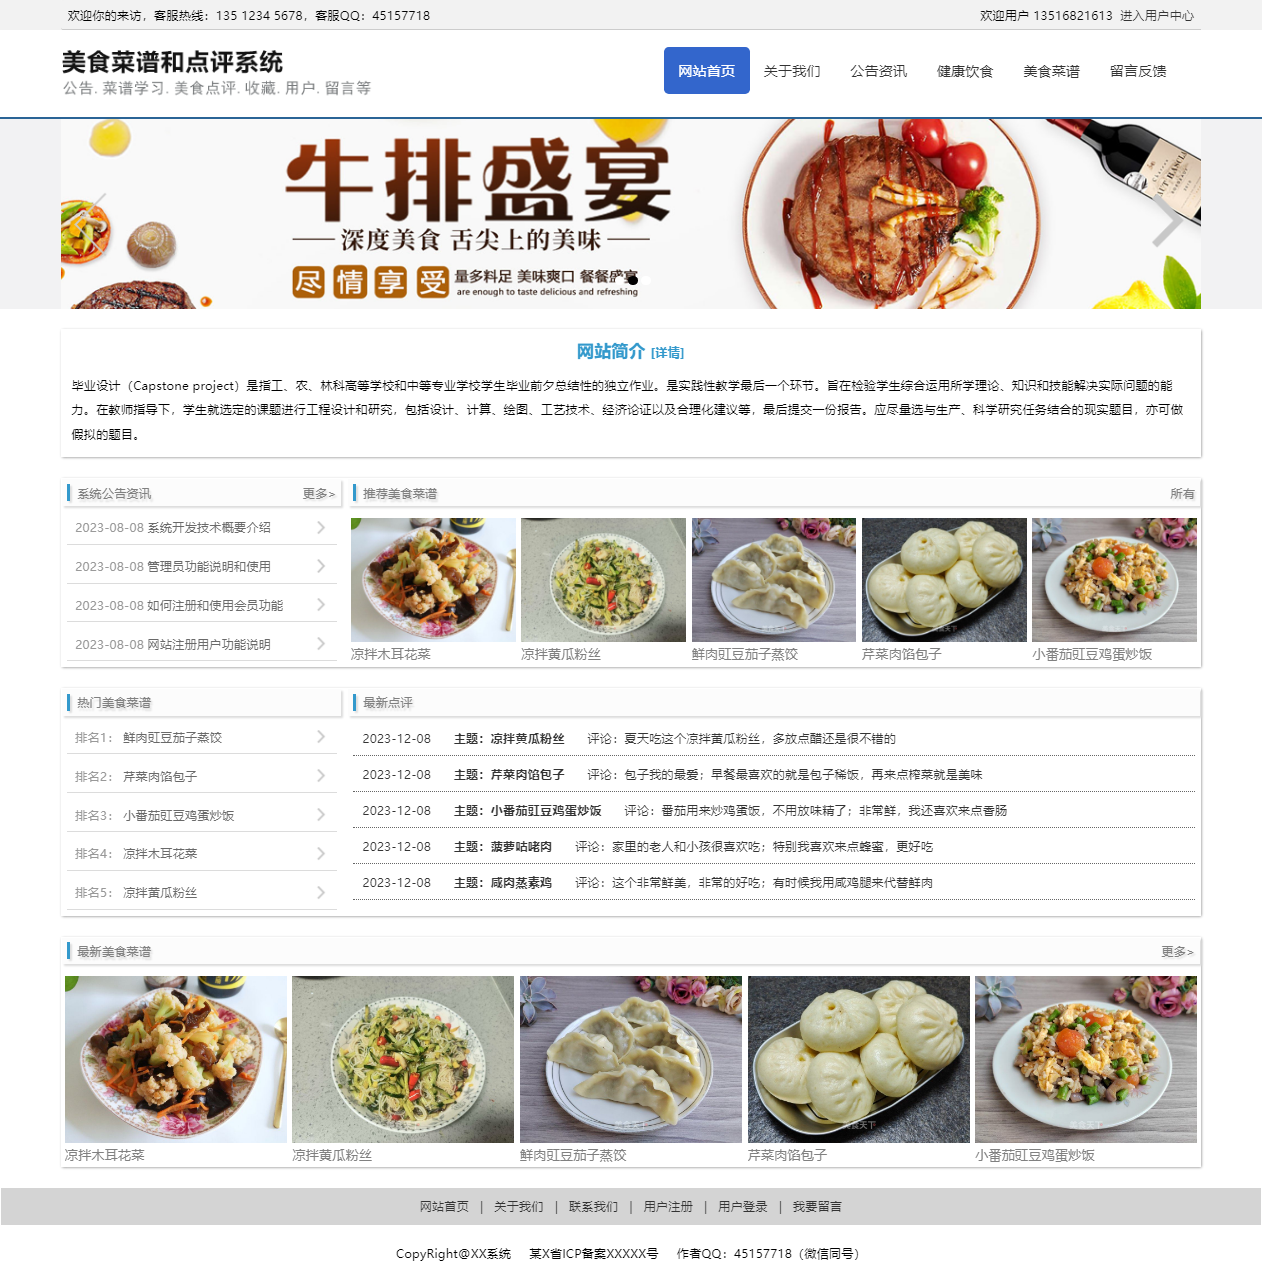 a1-food health and review system website website.png